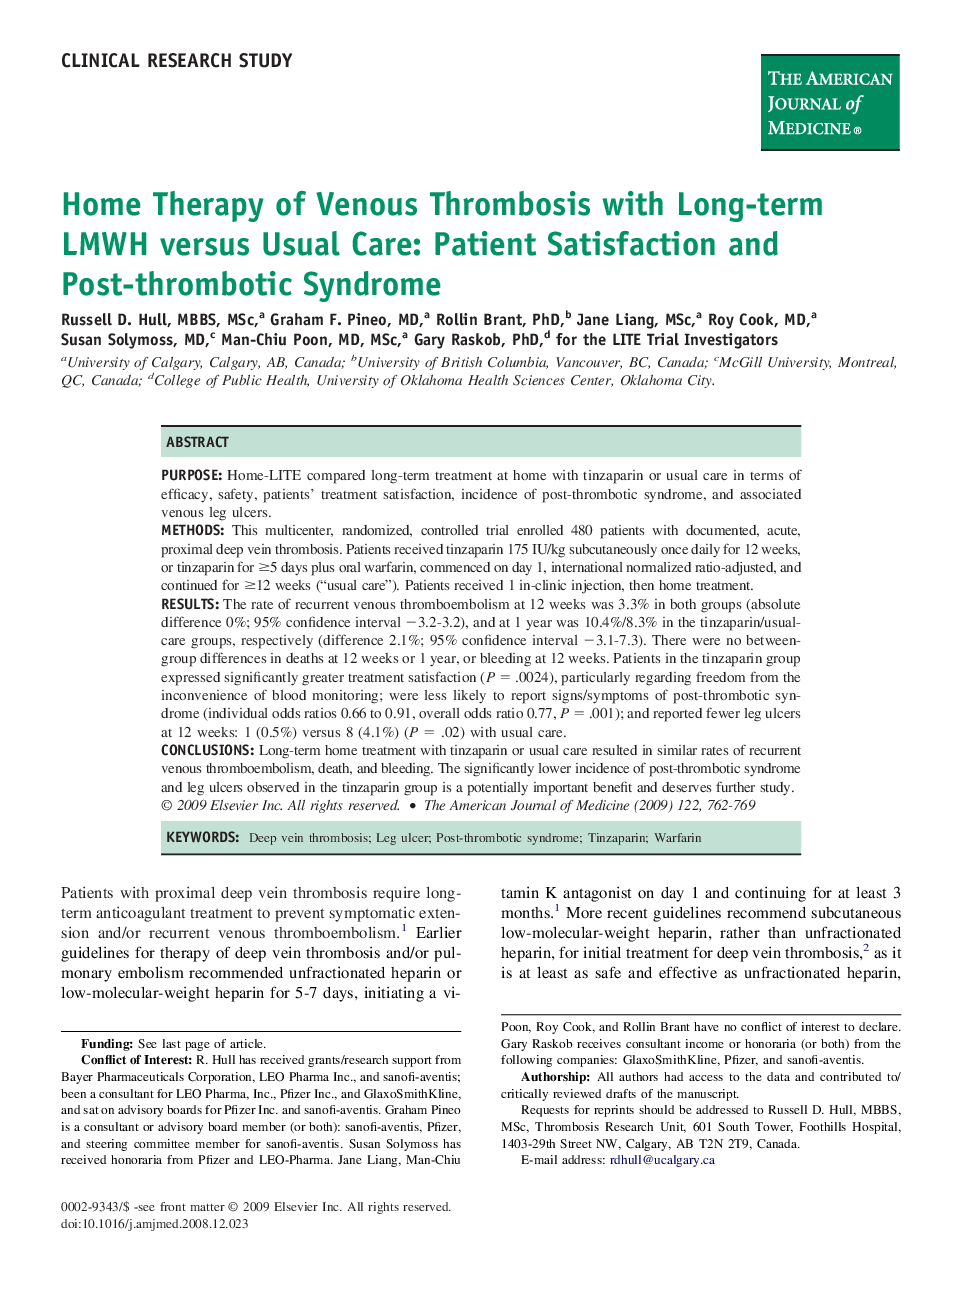 Home Therapy of Venous Thrombosis with Long-term LMWH versus Usual Care: Patient Satisfaction and Post-thrombotic Syndrome